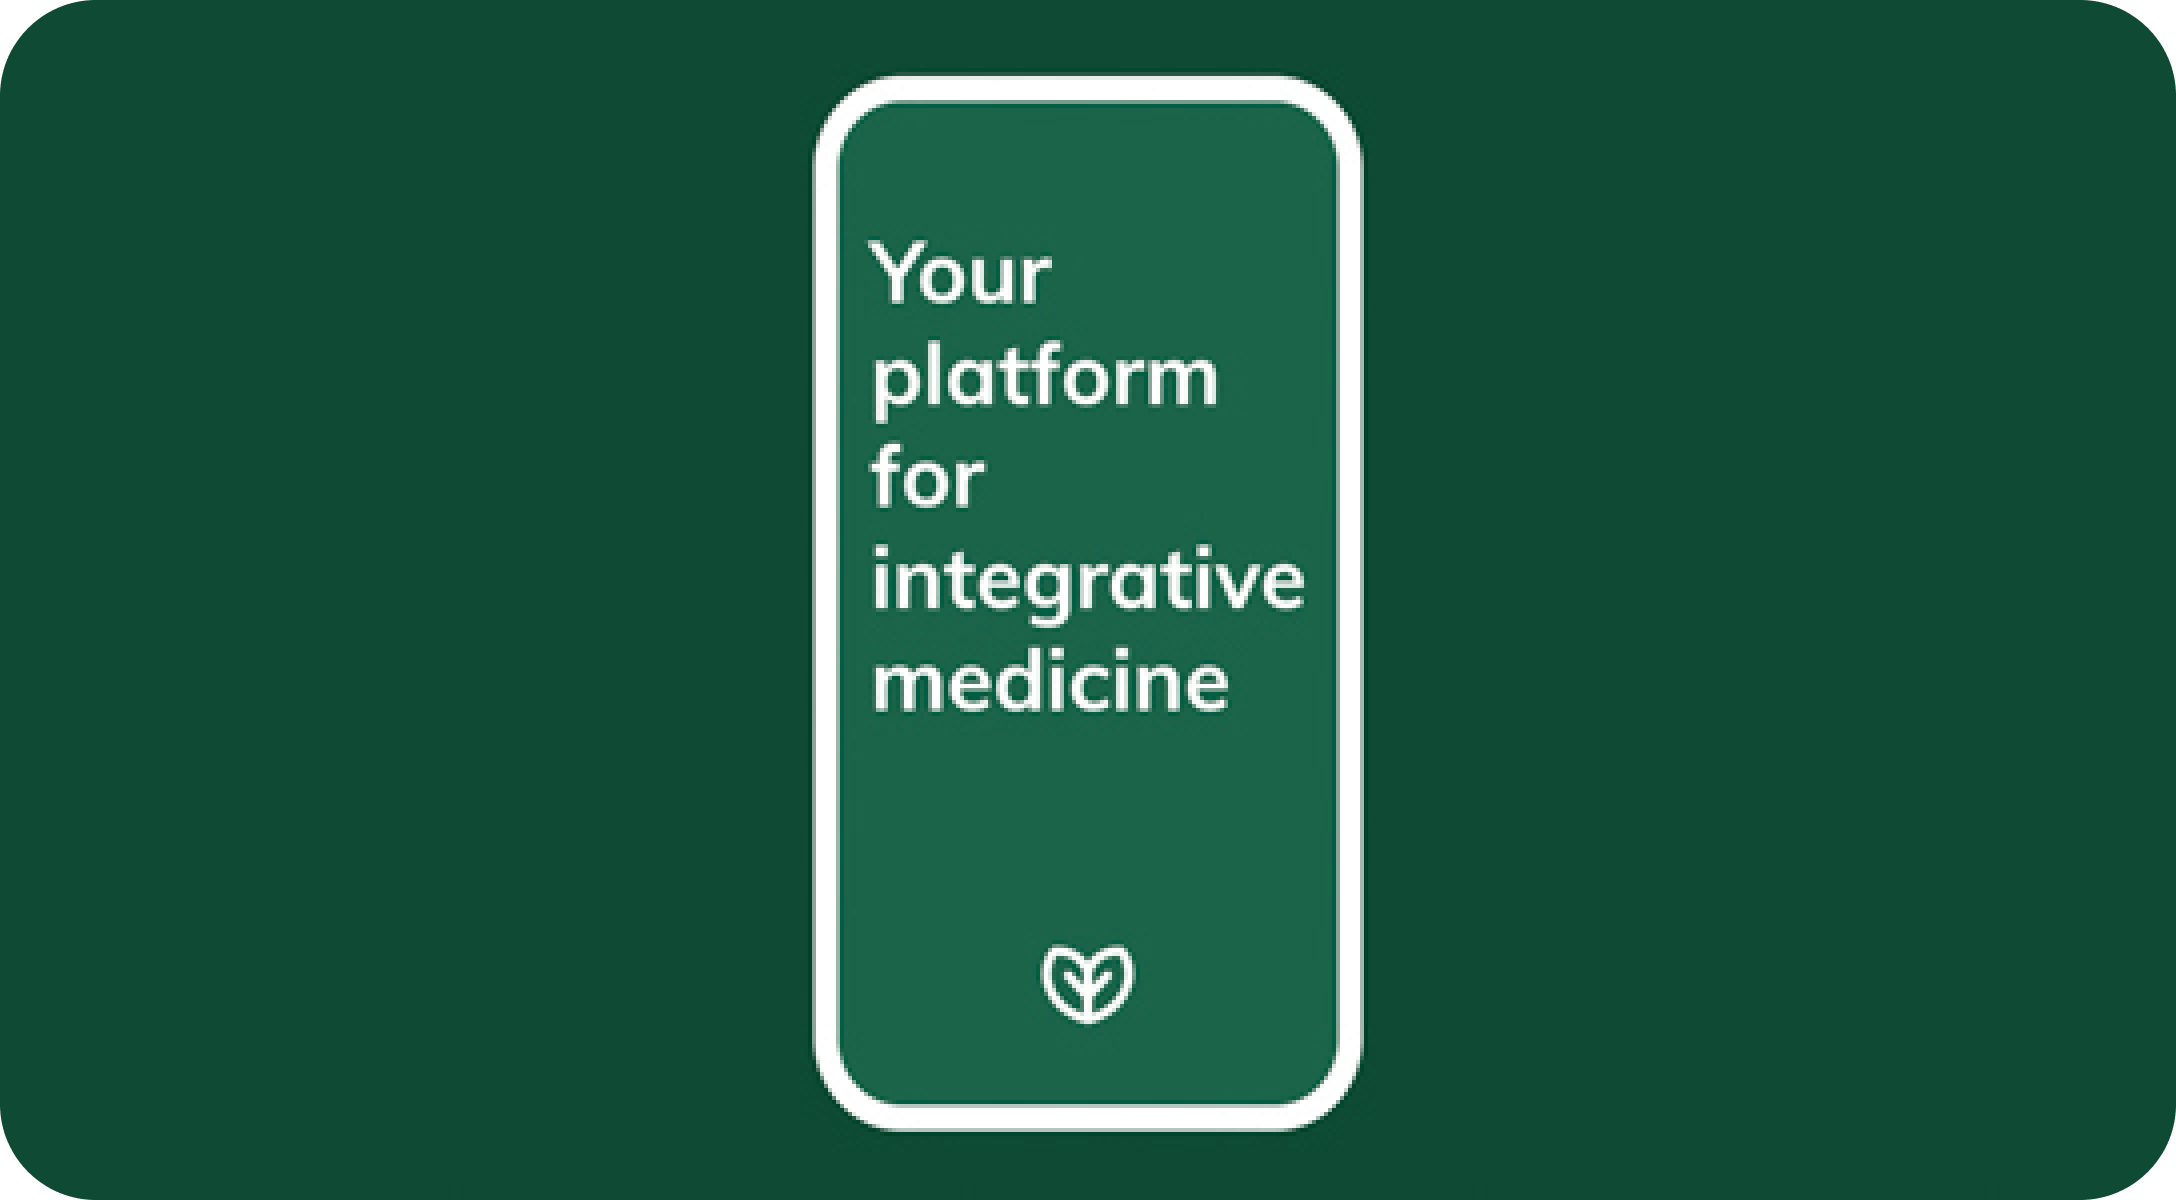 a mobile layout featuring the Fullscript leaf logo and the message 'Your platform for integrative medicine' displayed